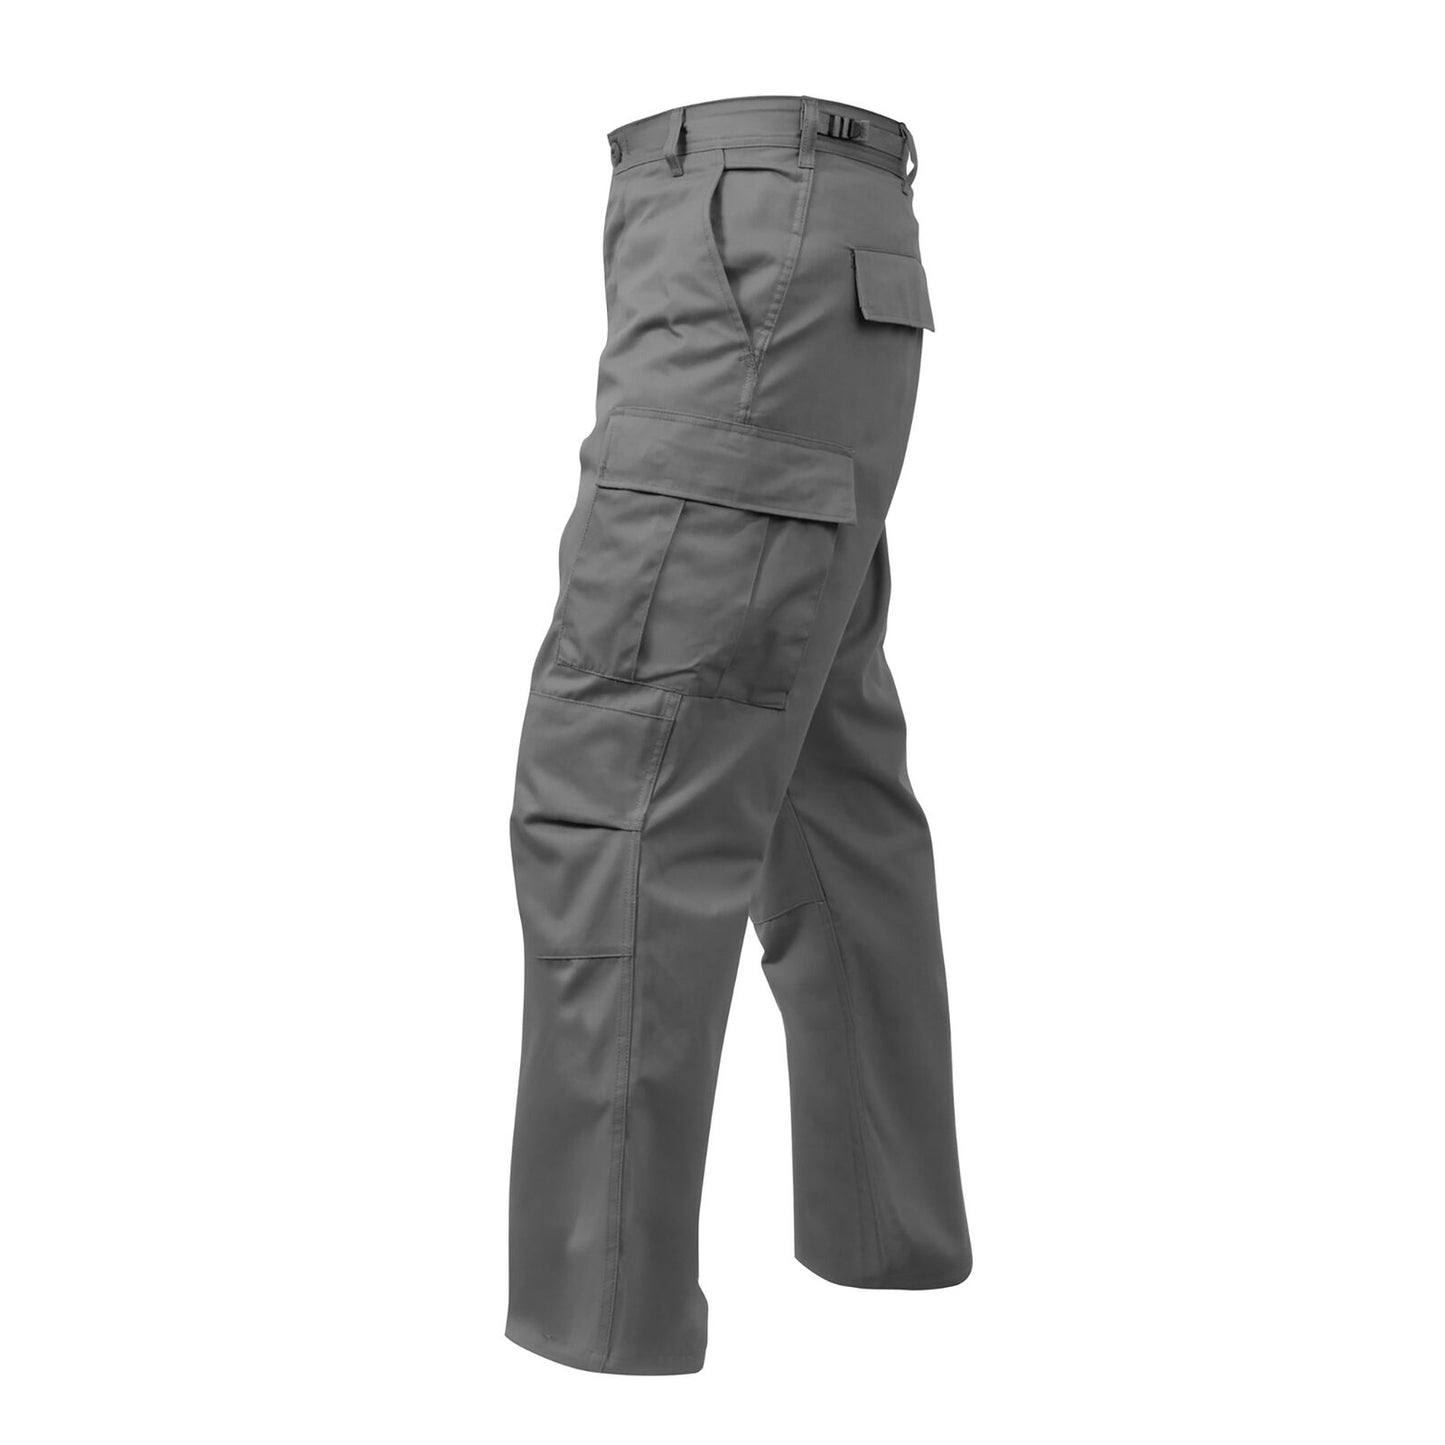 Rothco Relaxed Fit Zipper Fly BDU Pants in Grey